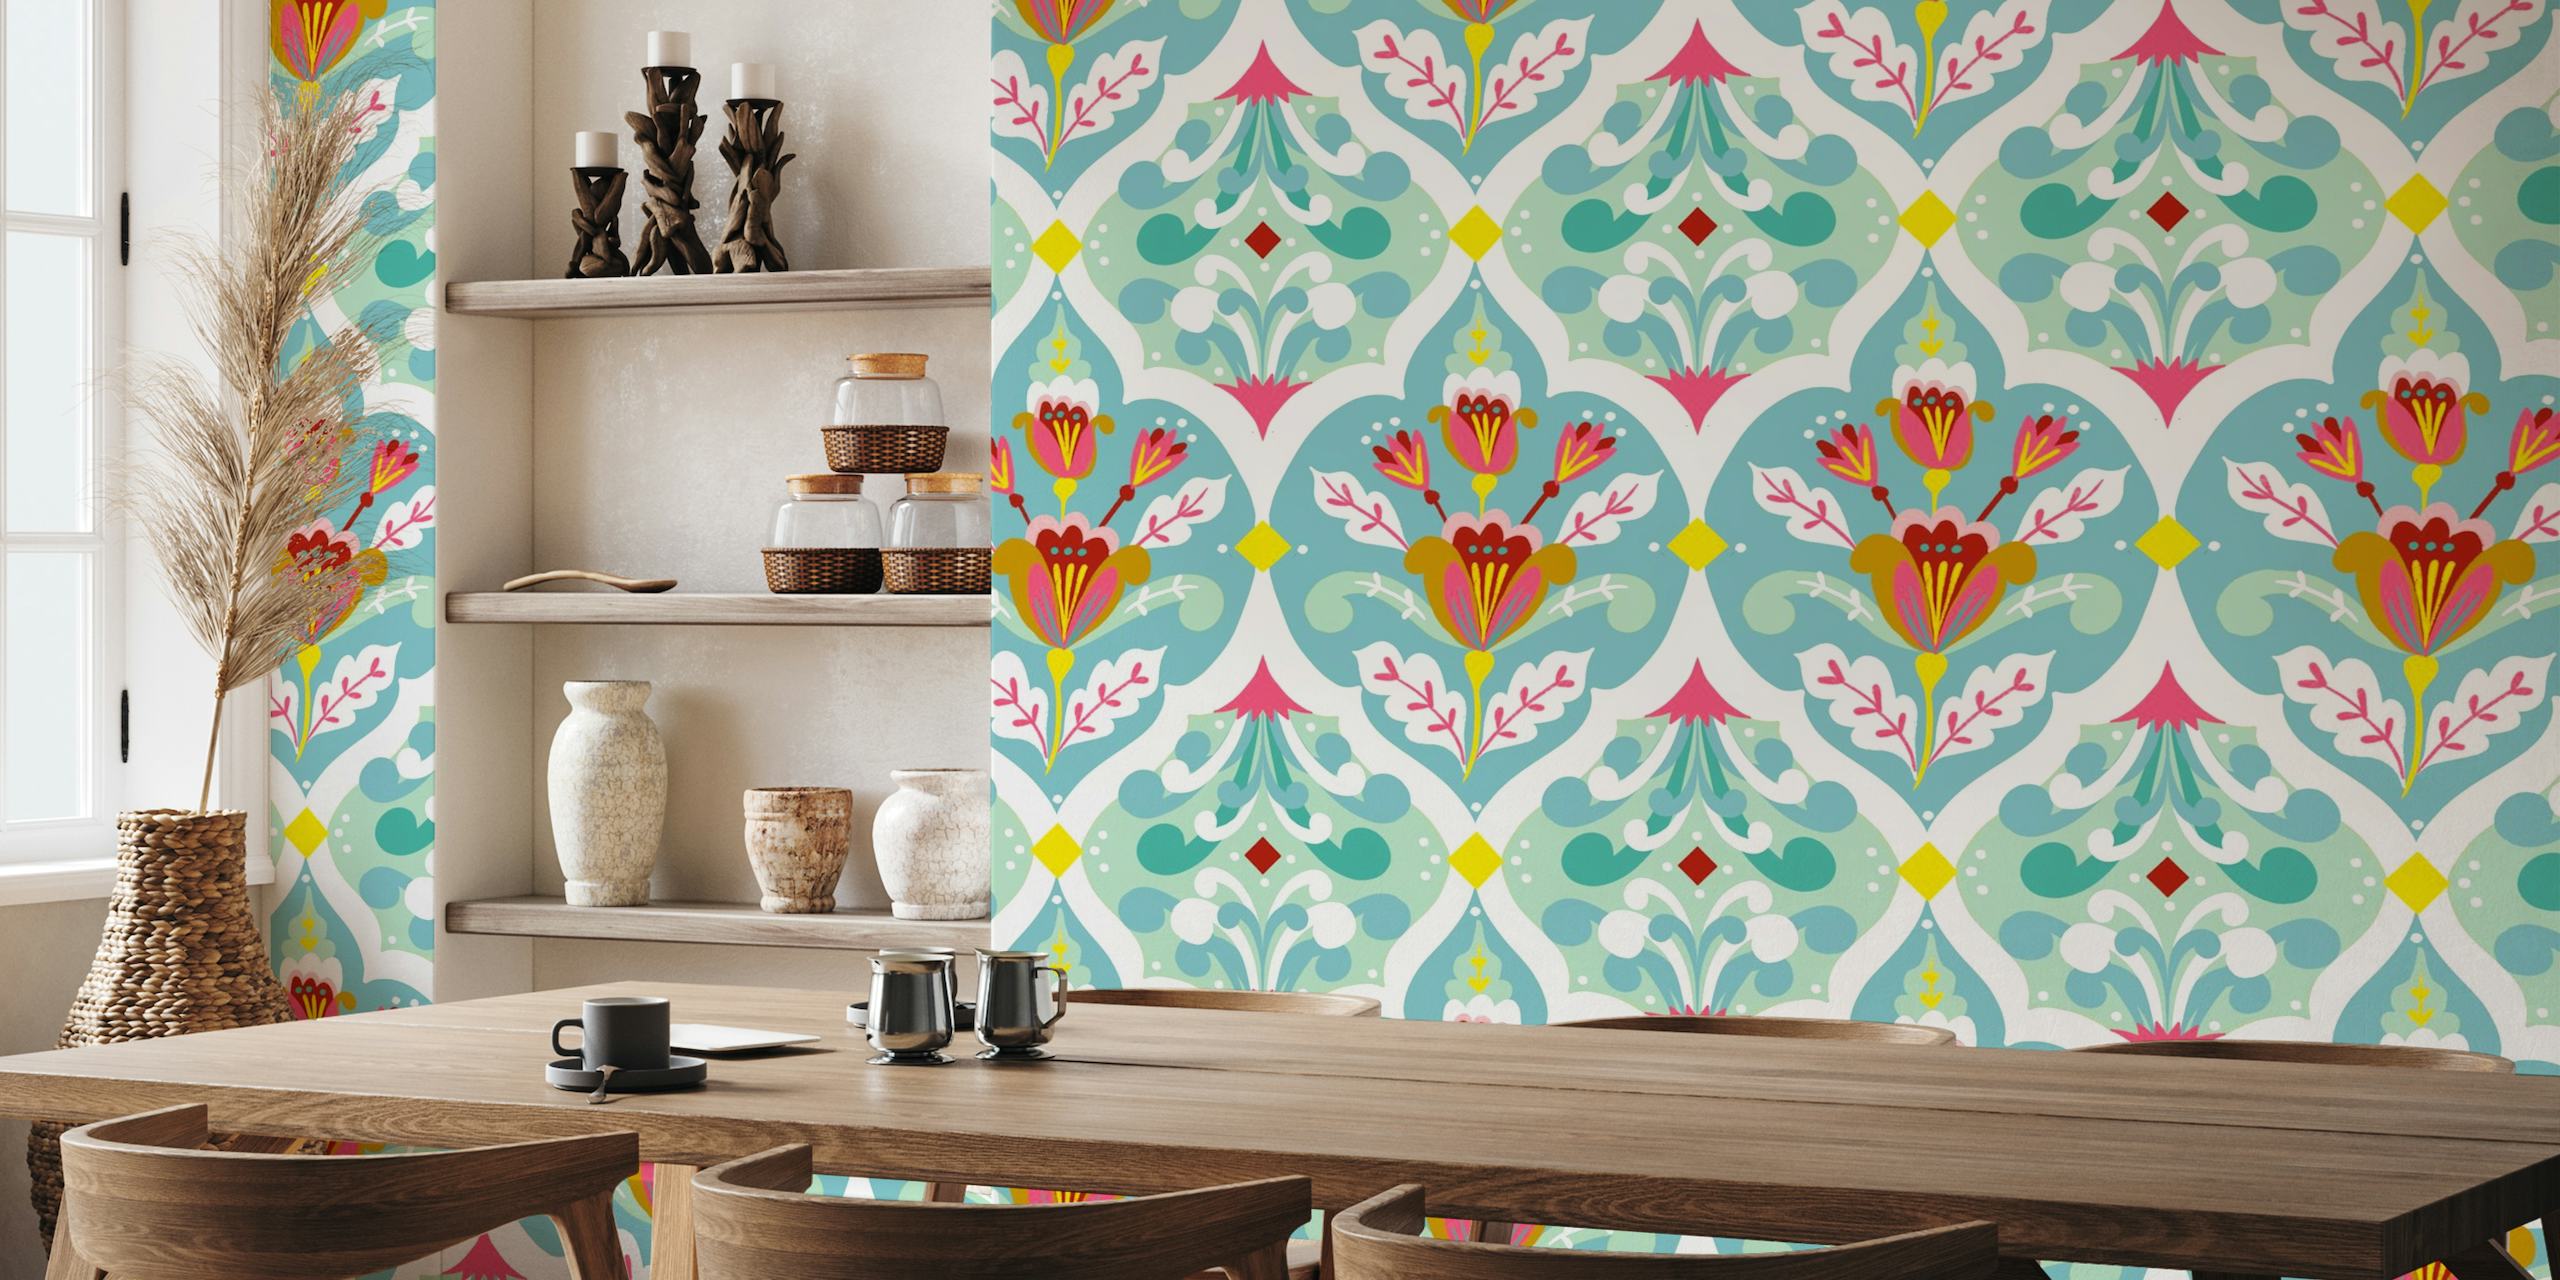 Elegant damask floral wall mural in mint tones with vibrant floral accents